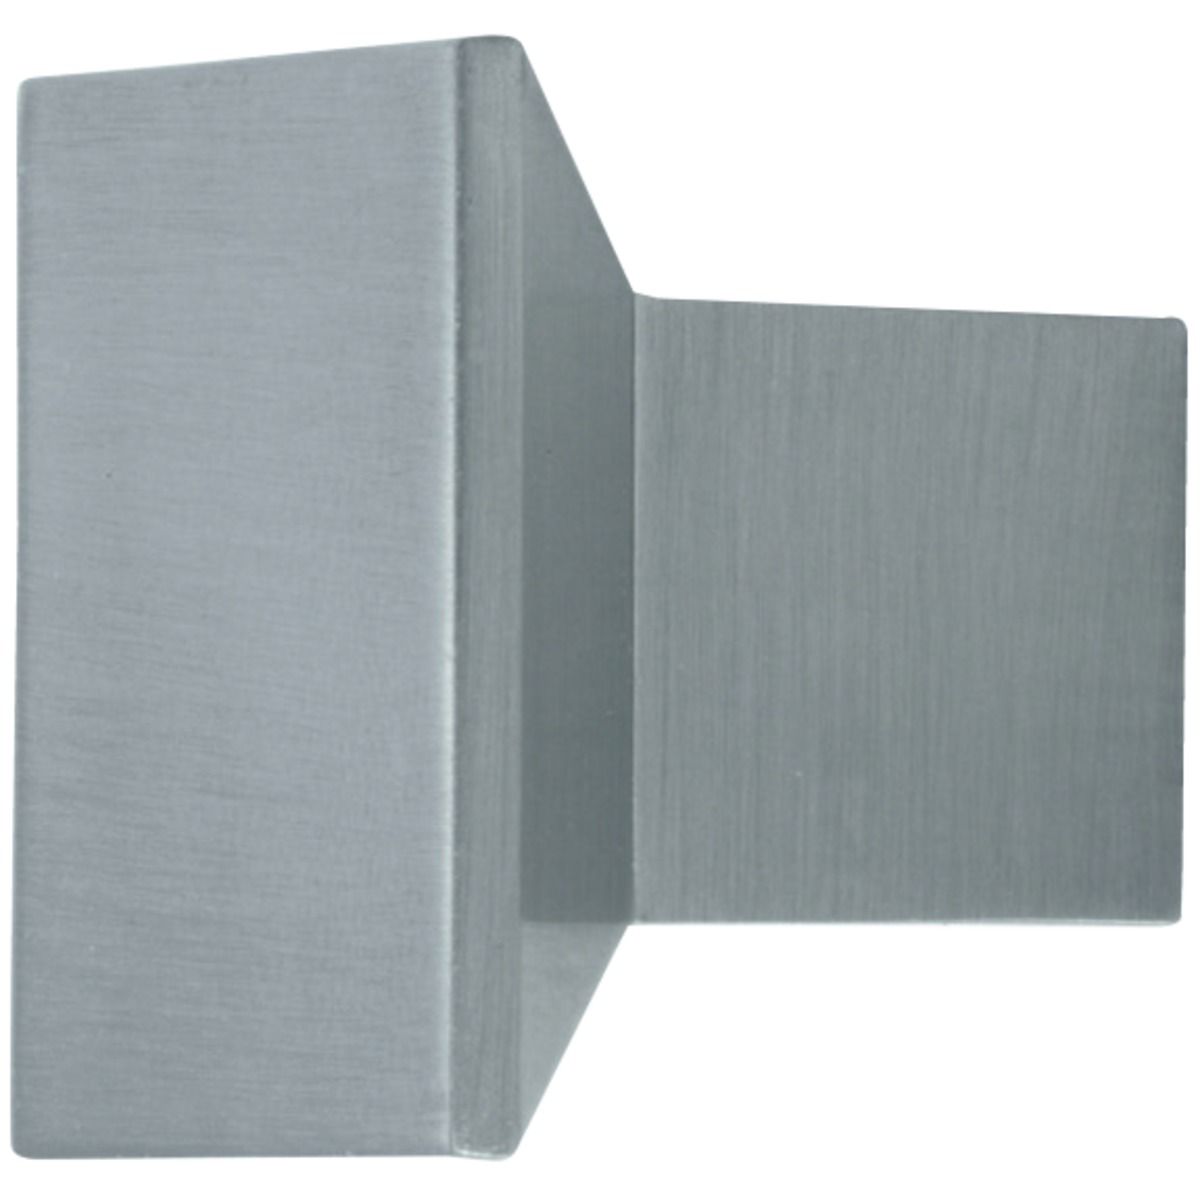 Image of Wickes Stainless Steel Square Knob Handle for Bathrooms - 35mm